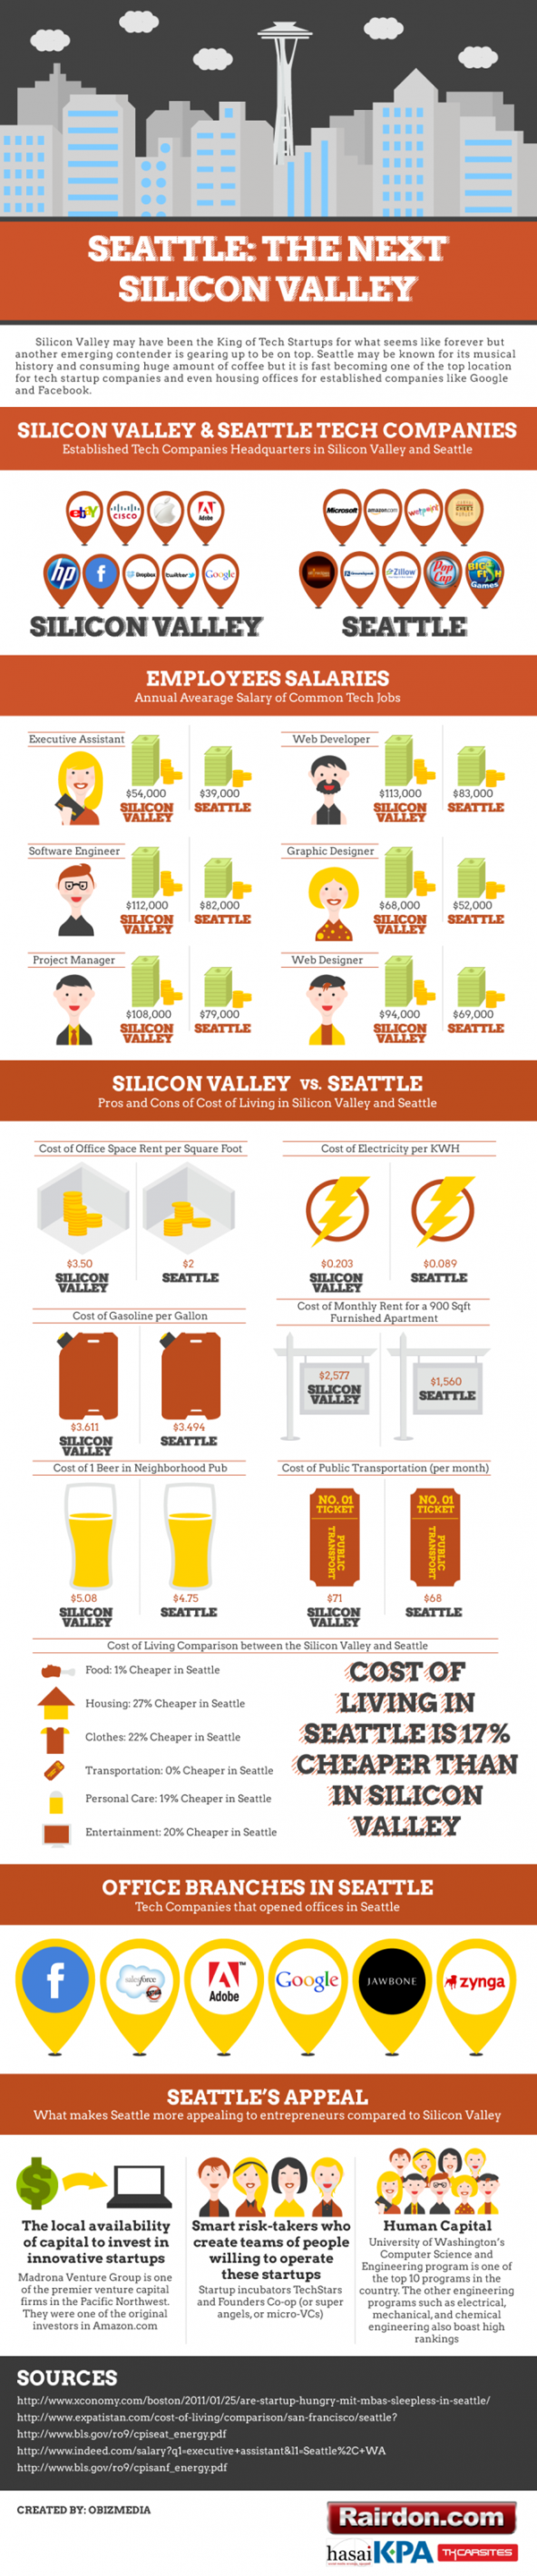 is-seattle-the-next-silicon-valley